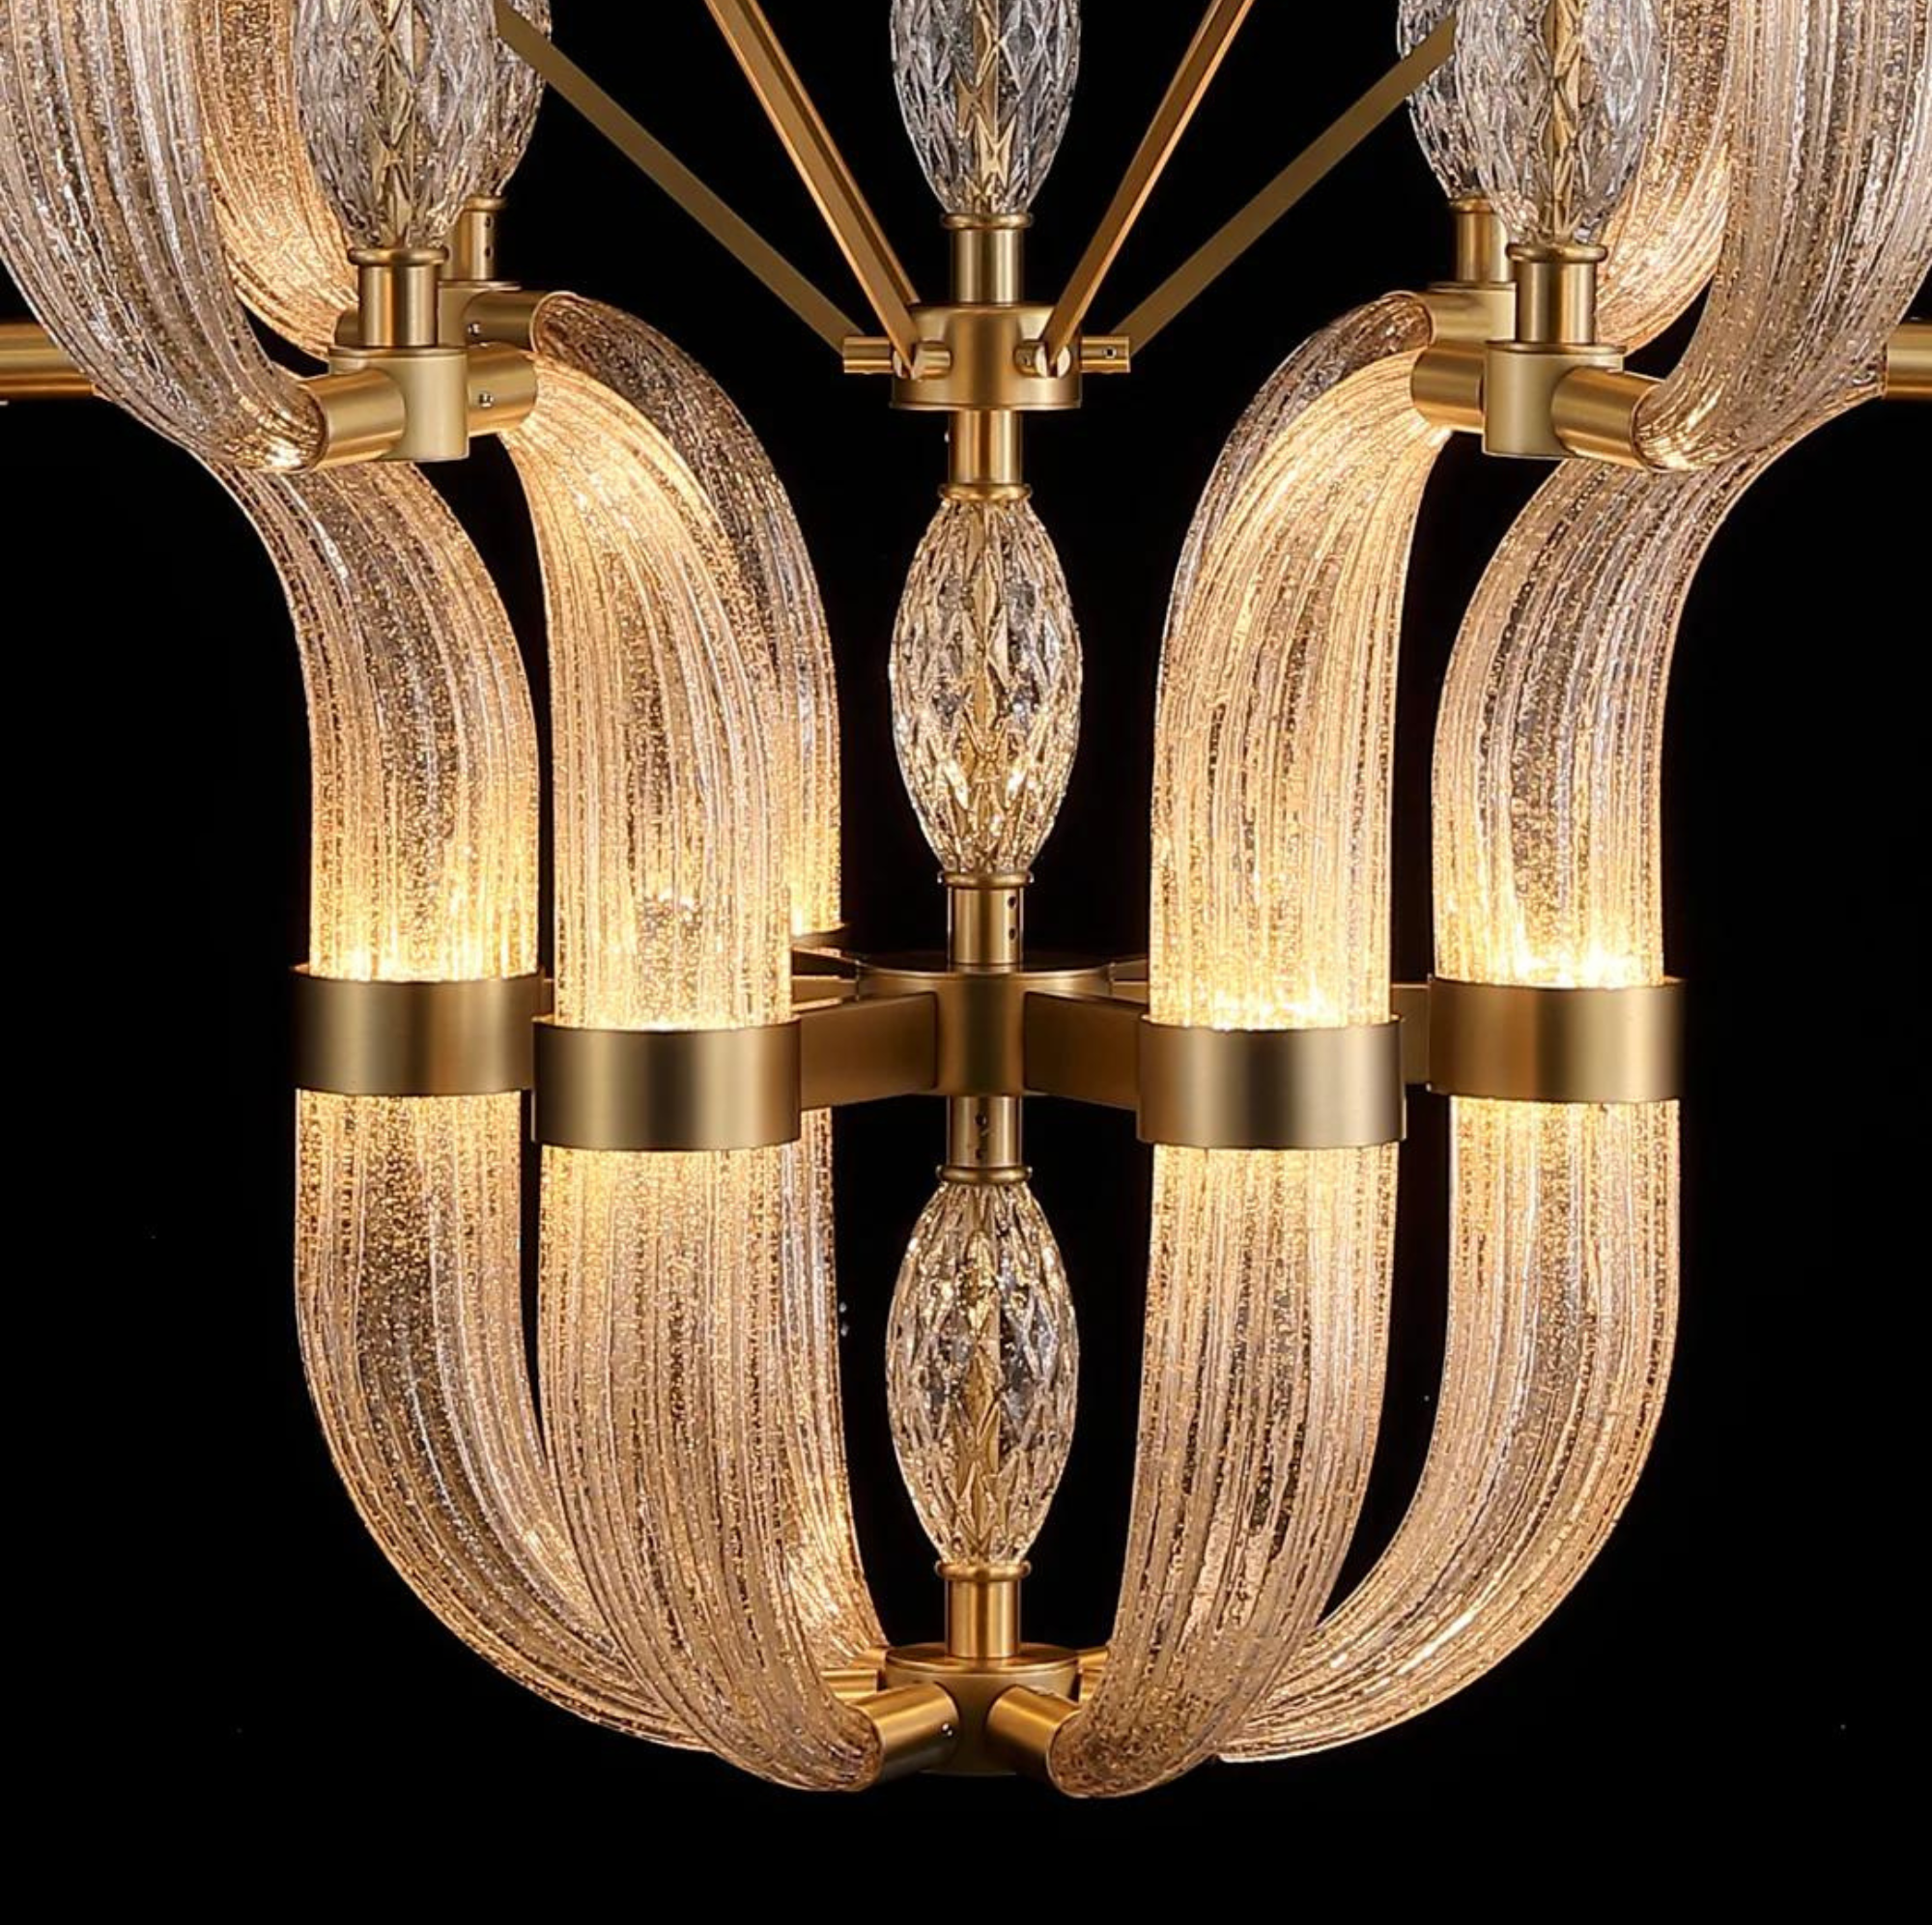 9500 Premium post-modern Iron Glass circle Adjustable Chandeliers for dining room, living room, bedroom, hotel, club creative chandelier